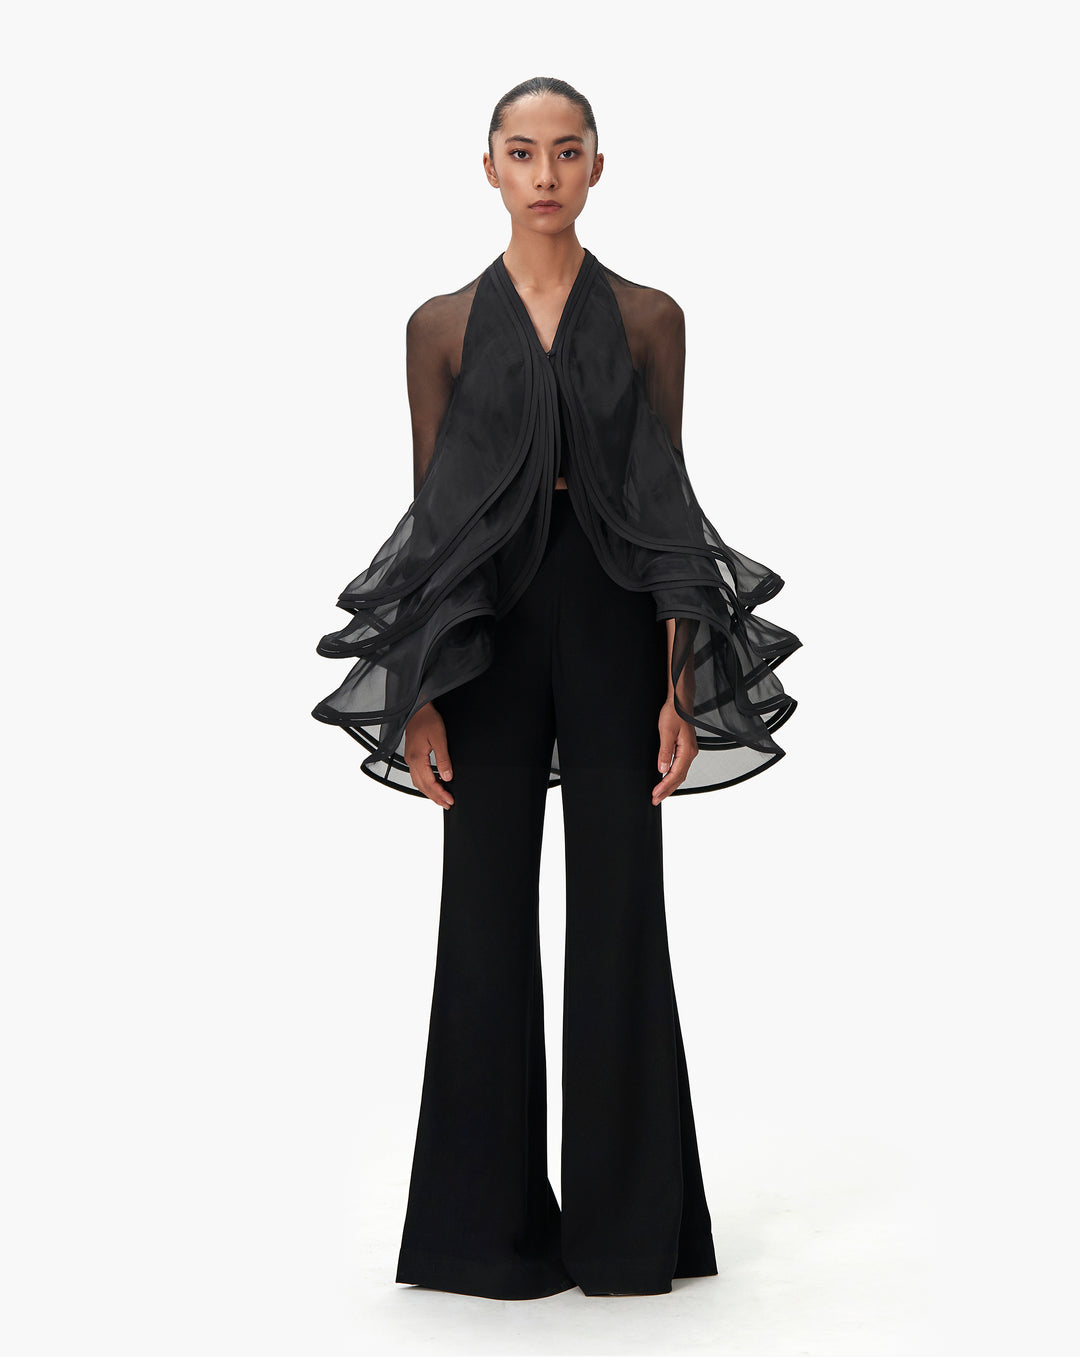 The Black Ruffle Cape with Top - Trouser Set